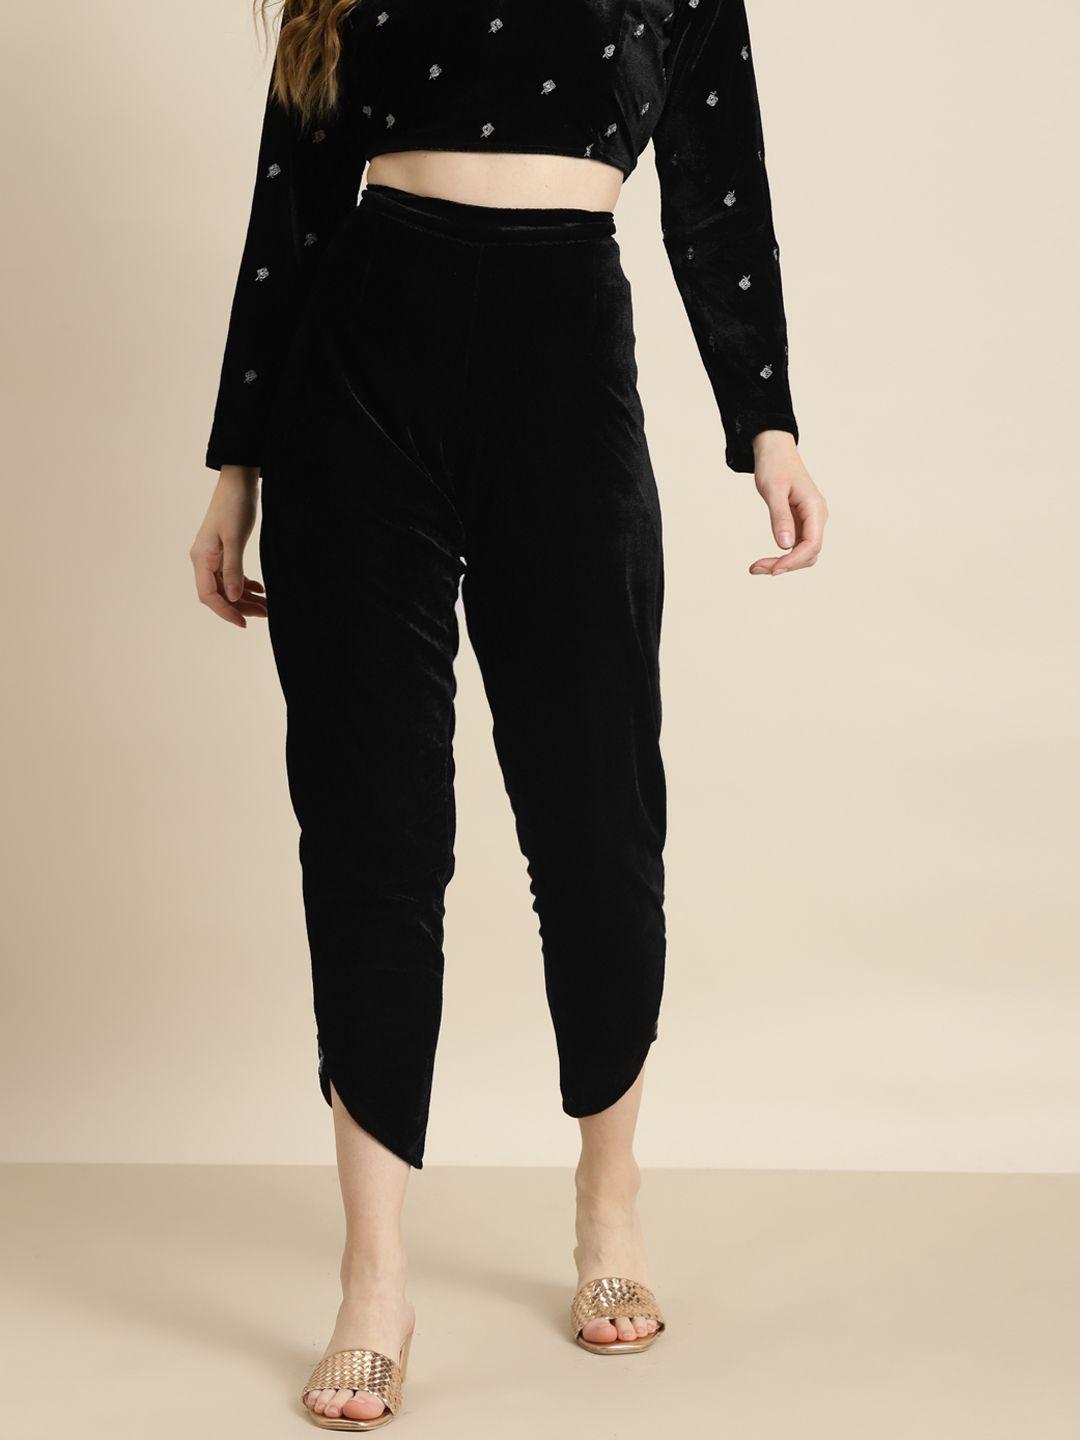 shae by sassafras women black embroidered trousers